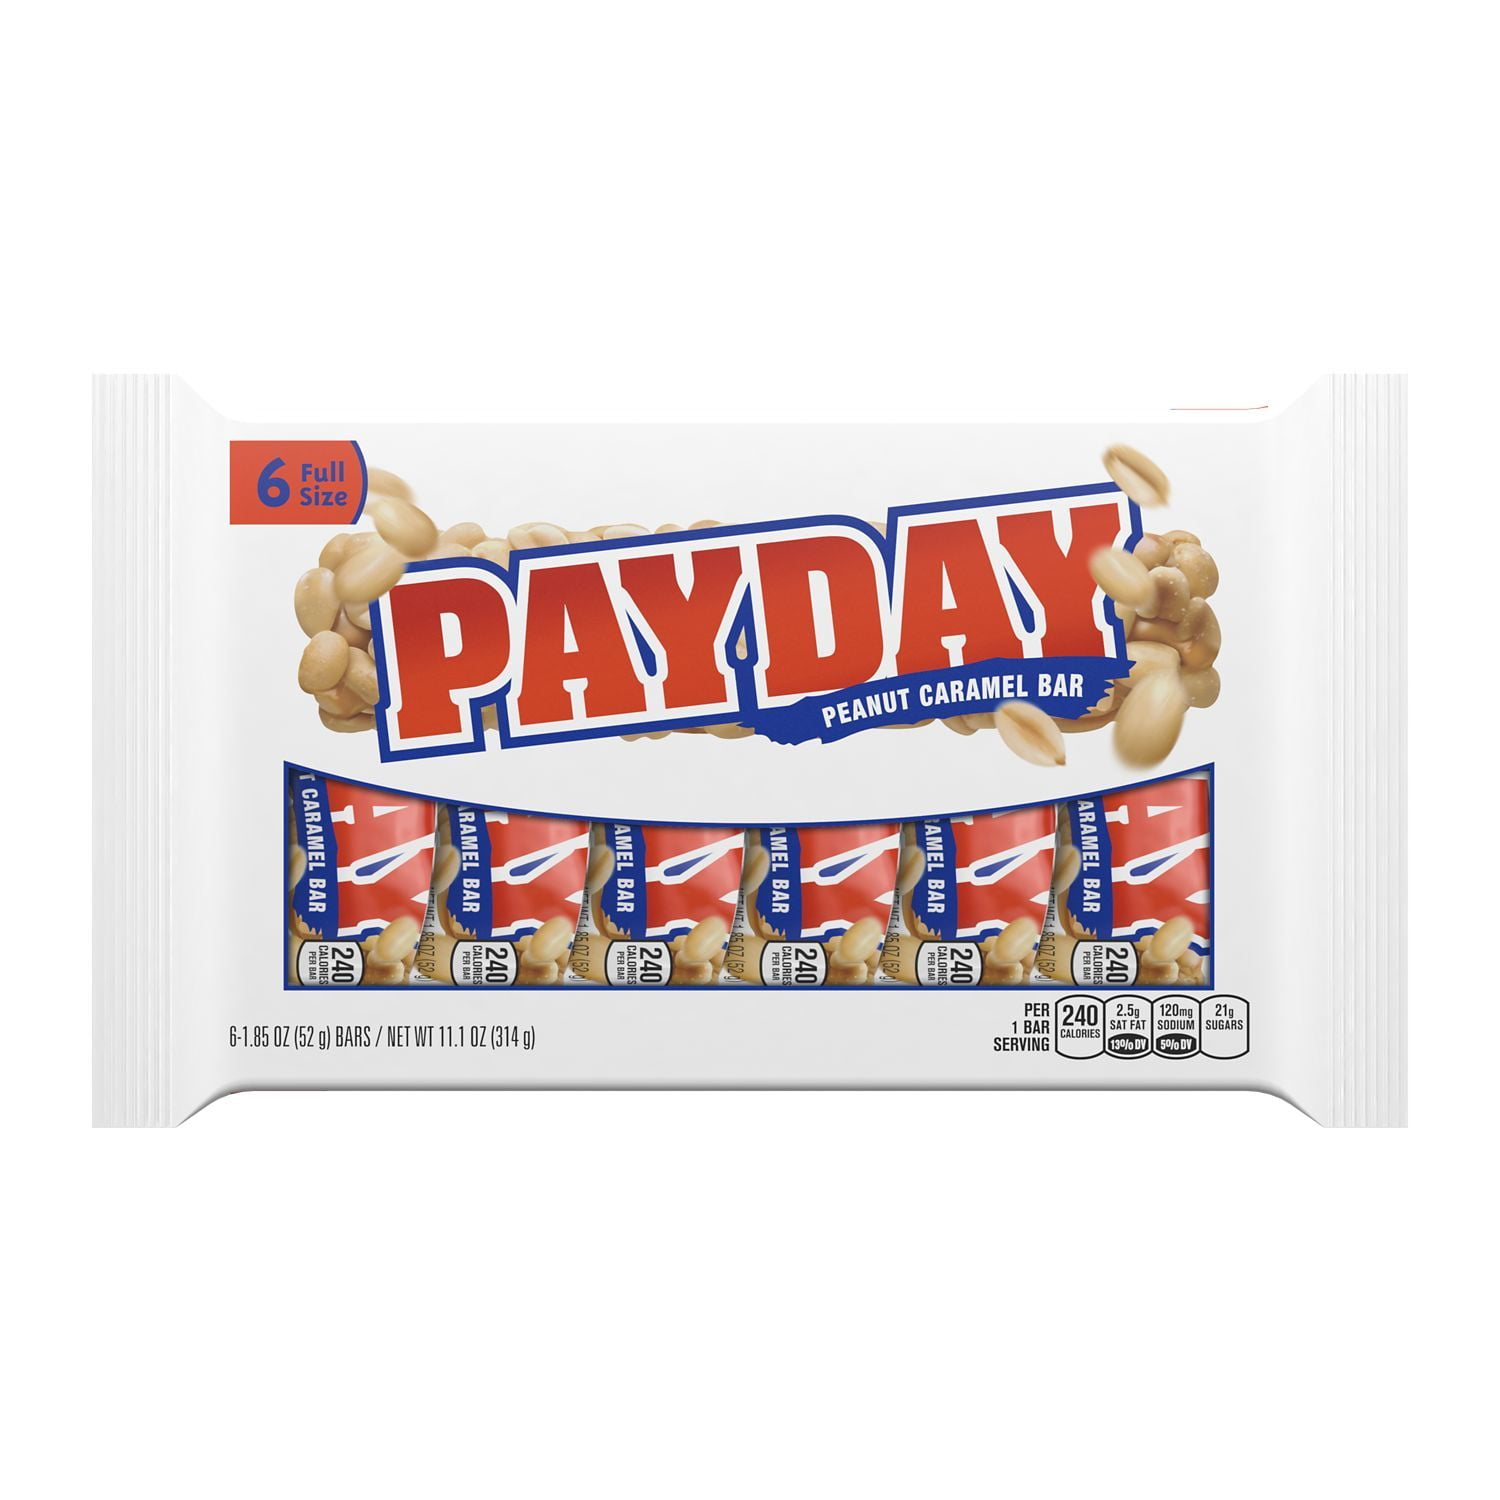 PAYDAY, Peanut Caramel Candy, Individually Wrapped, Gluten Free, 1.85 oz, Bars (6 Count)